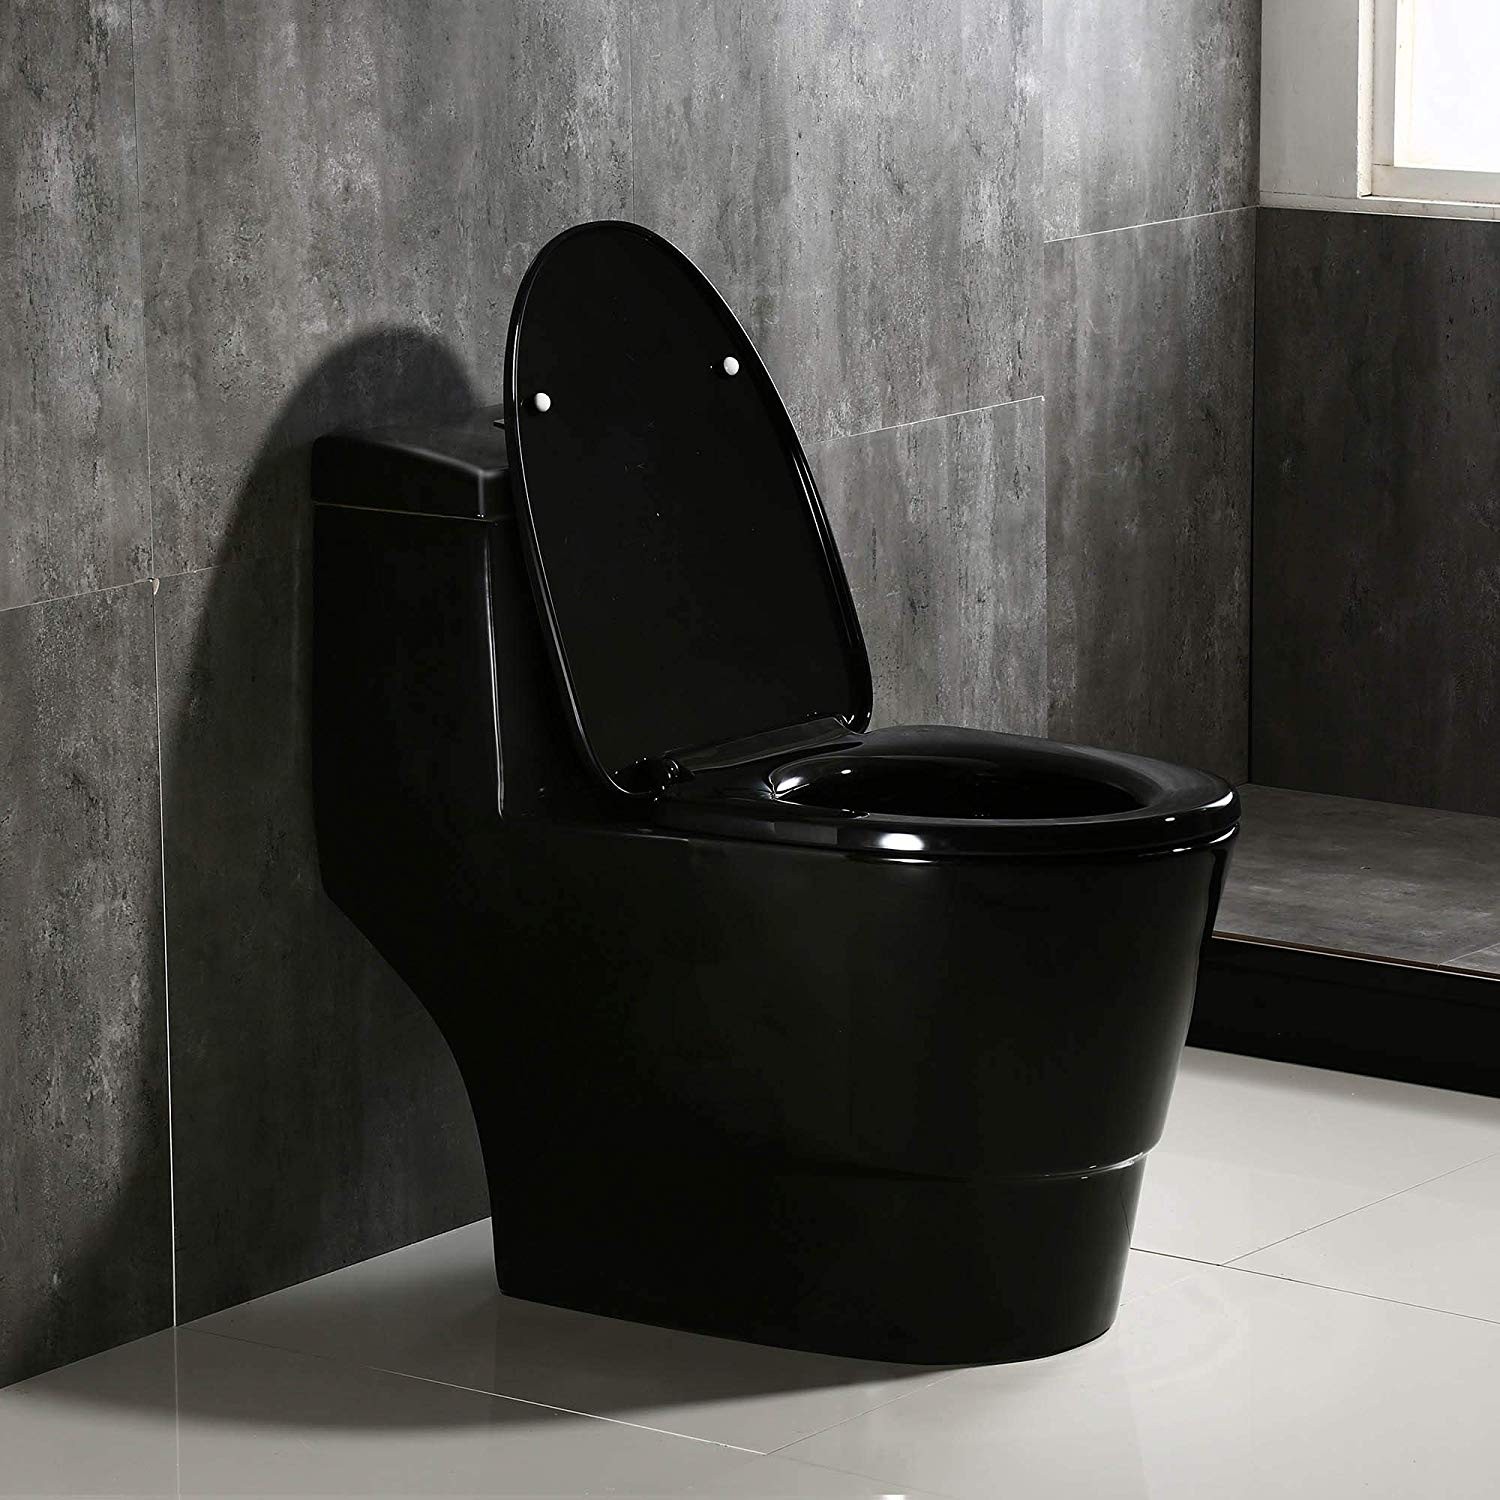  WOODBRIDGEE One Piece Toilet with Soft Closing Seat, Chair Height, 1.28 GPF Dual, Water Sensed, 1000 Gram MaP Flushing Score Toilet, B0941, Black_9906